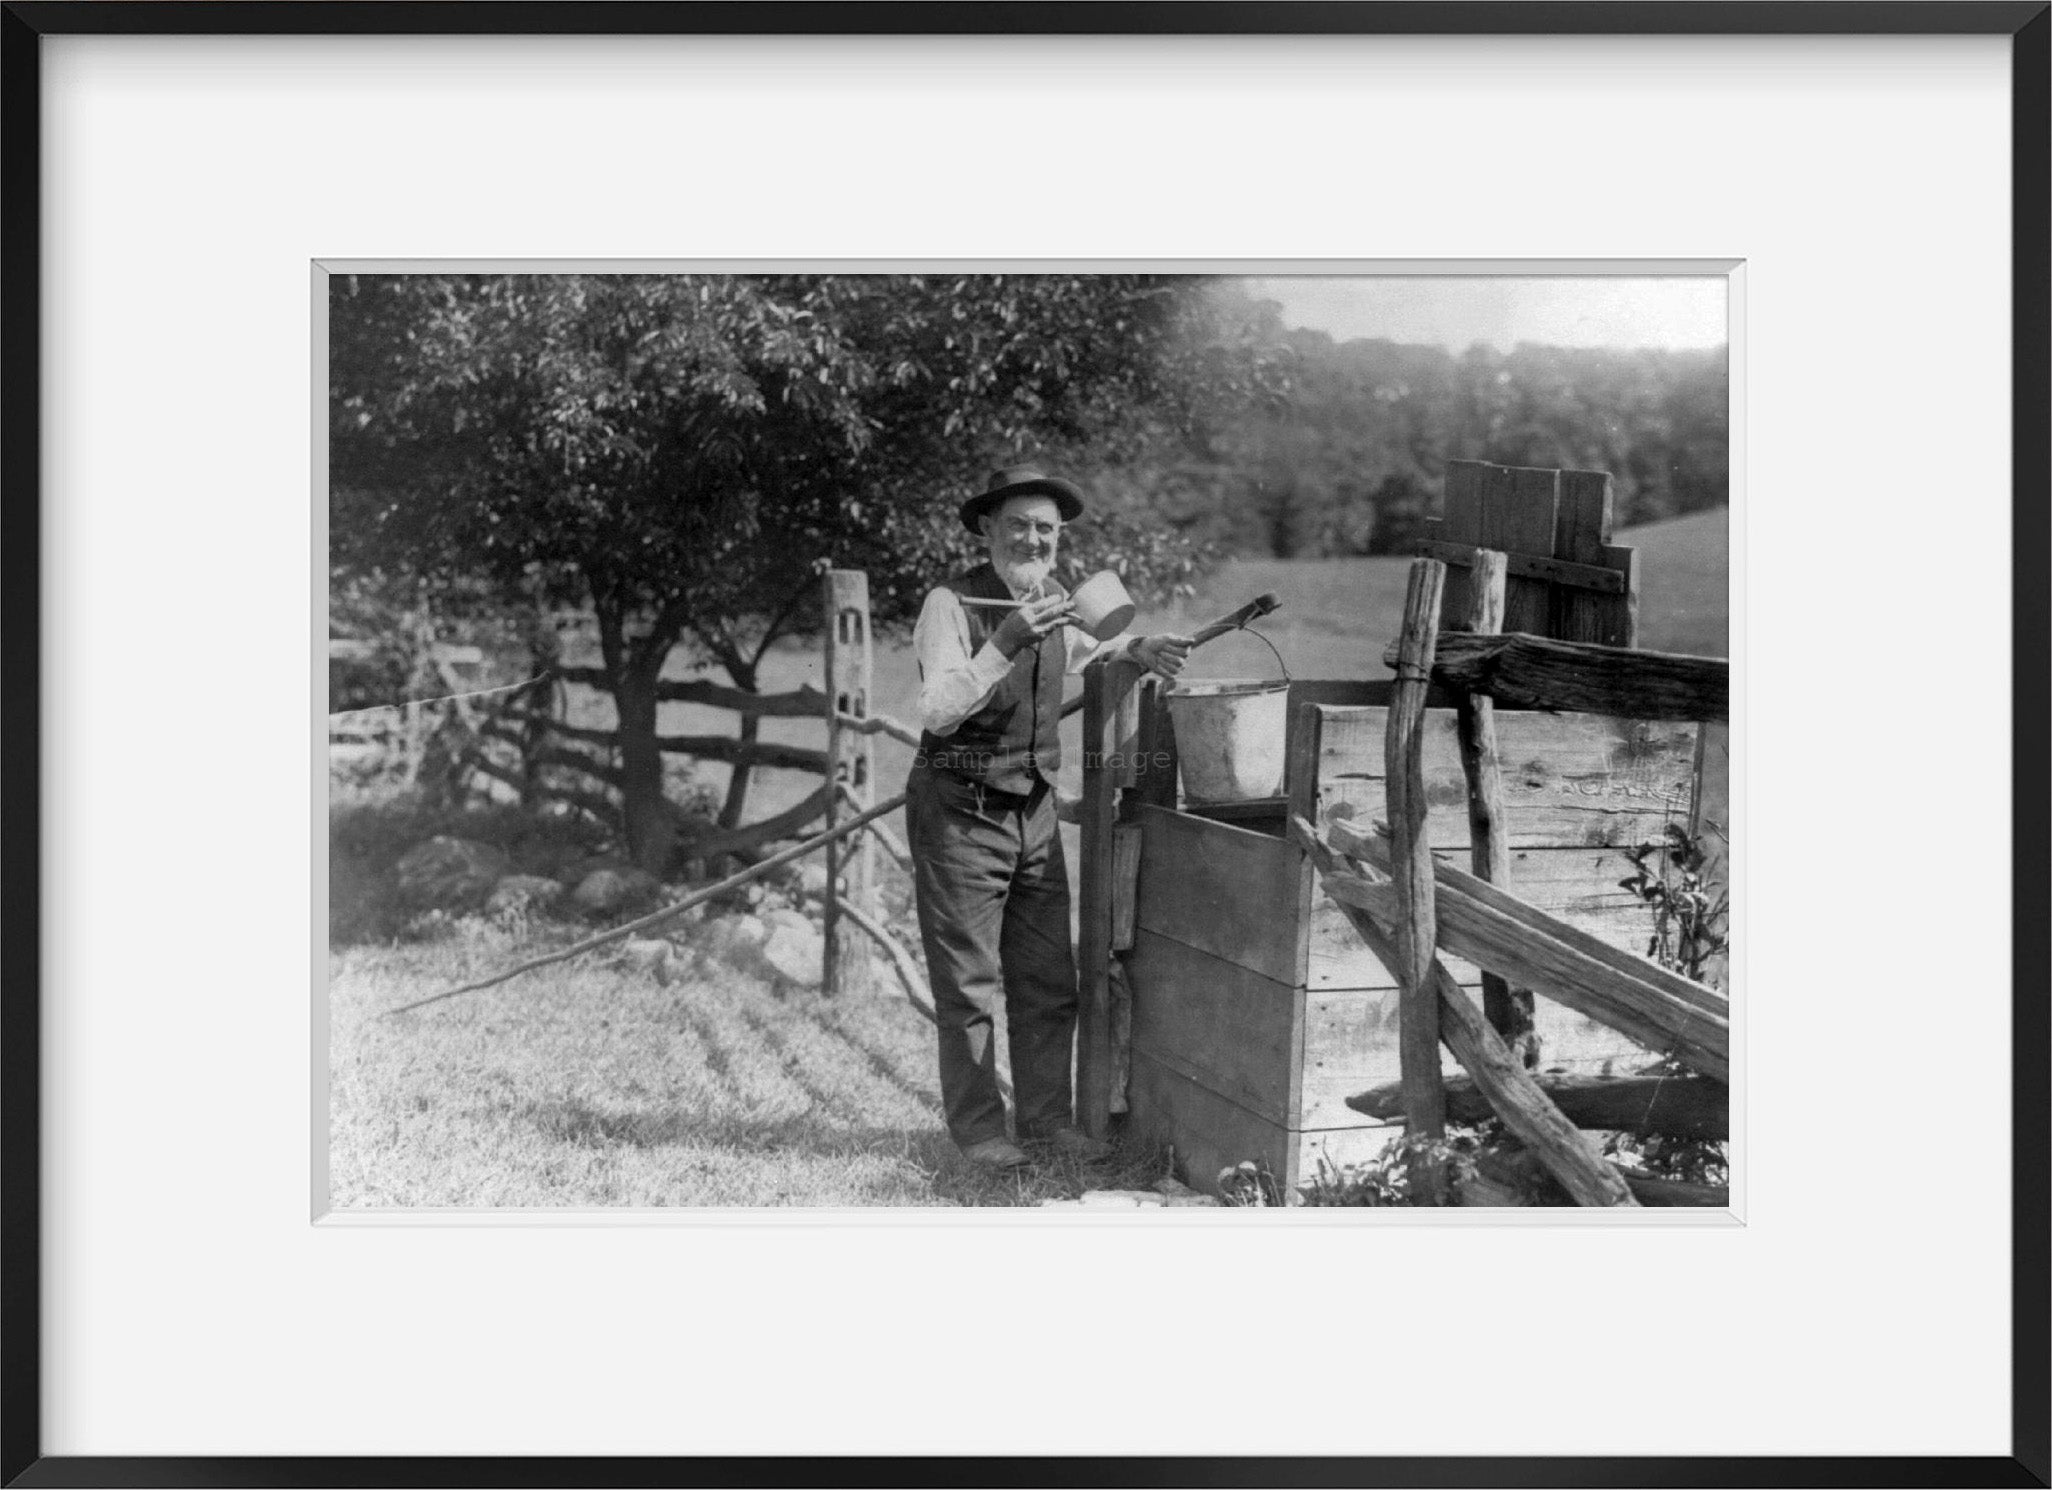 Photo: Old man drinking from dipper at well, c1912, wooden fence, man holding bucke